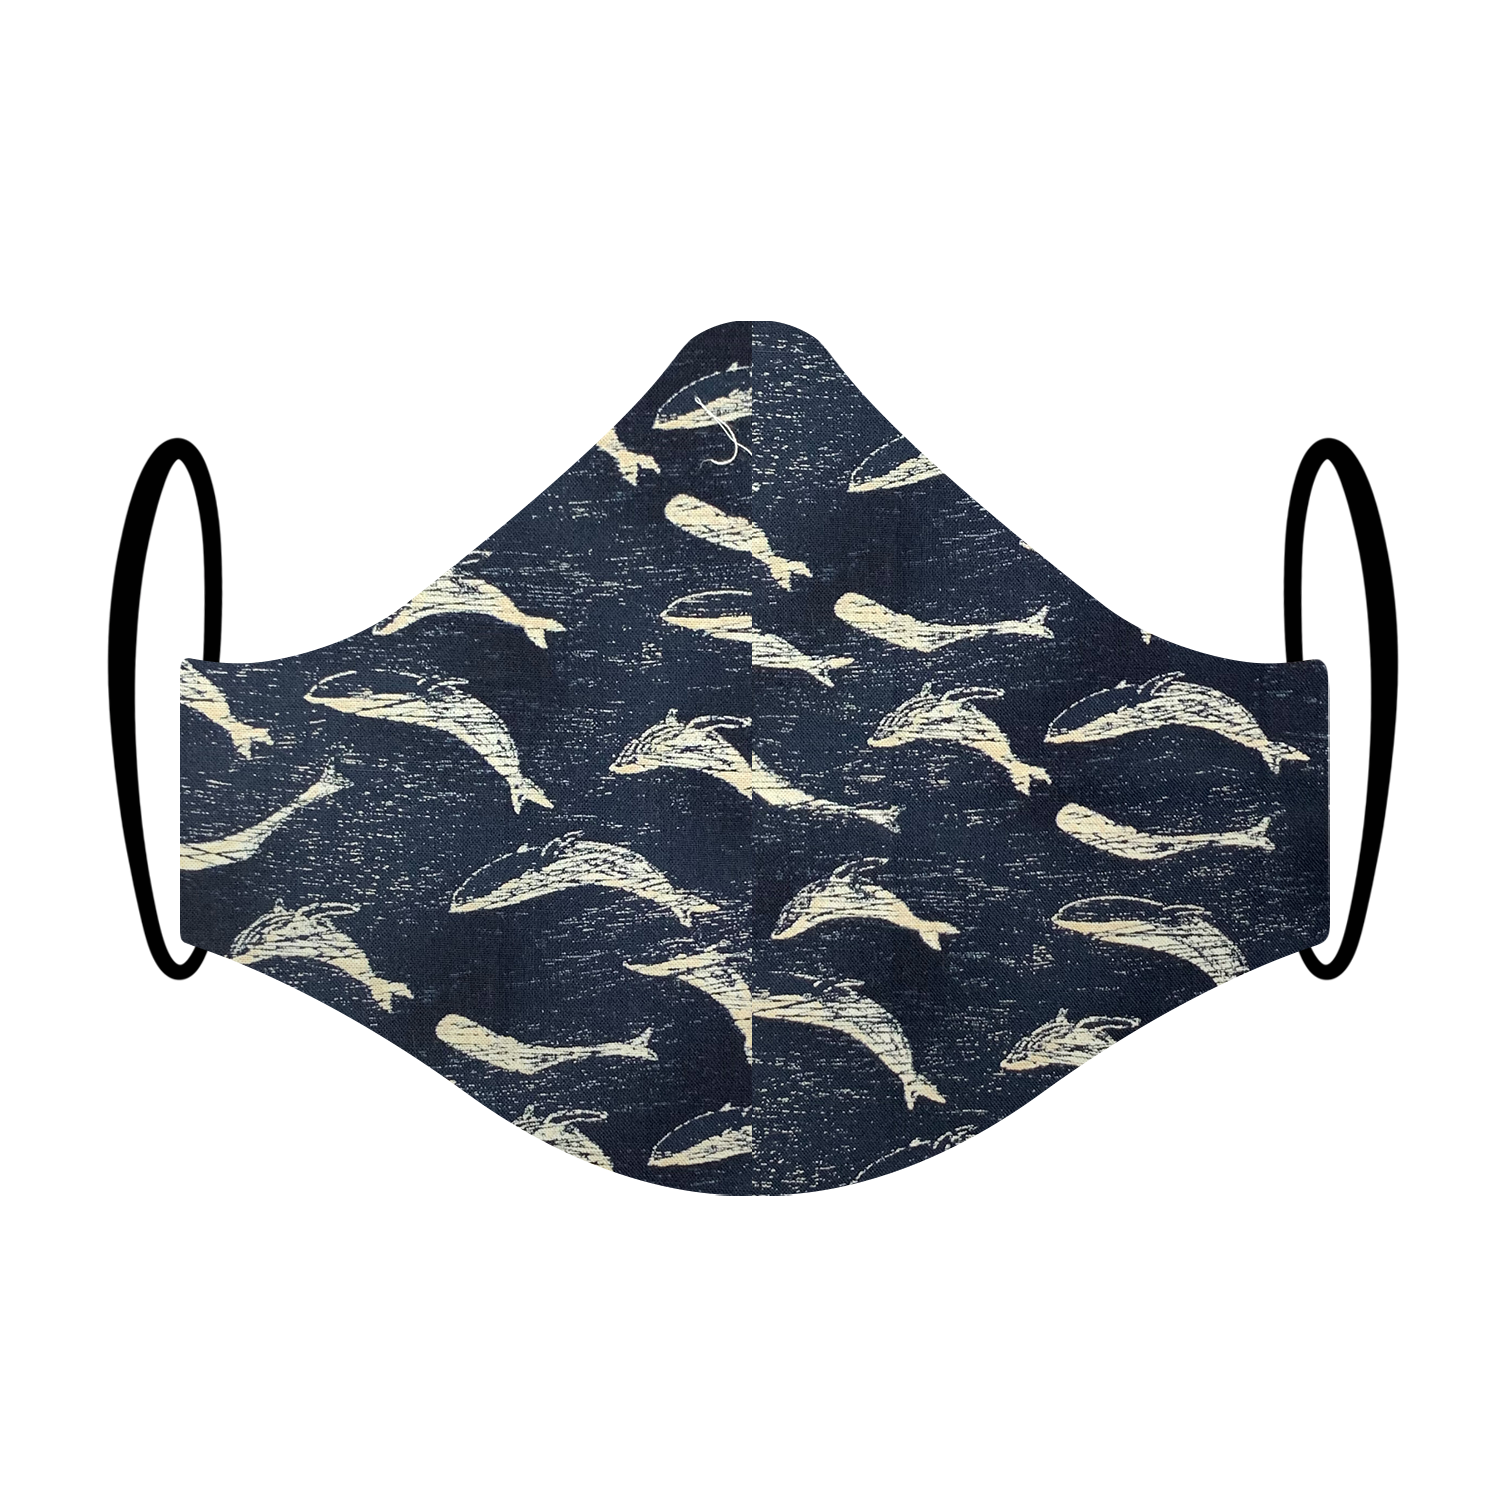 Triple layered face mask made in Melbourne Australia from cotton and poplin featuring a unique whale ocean print